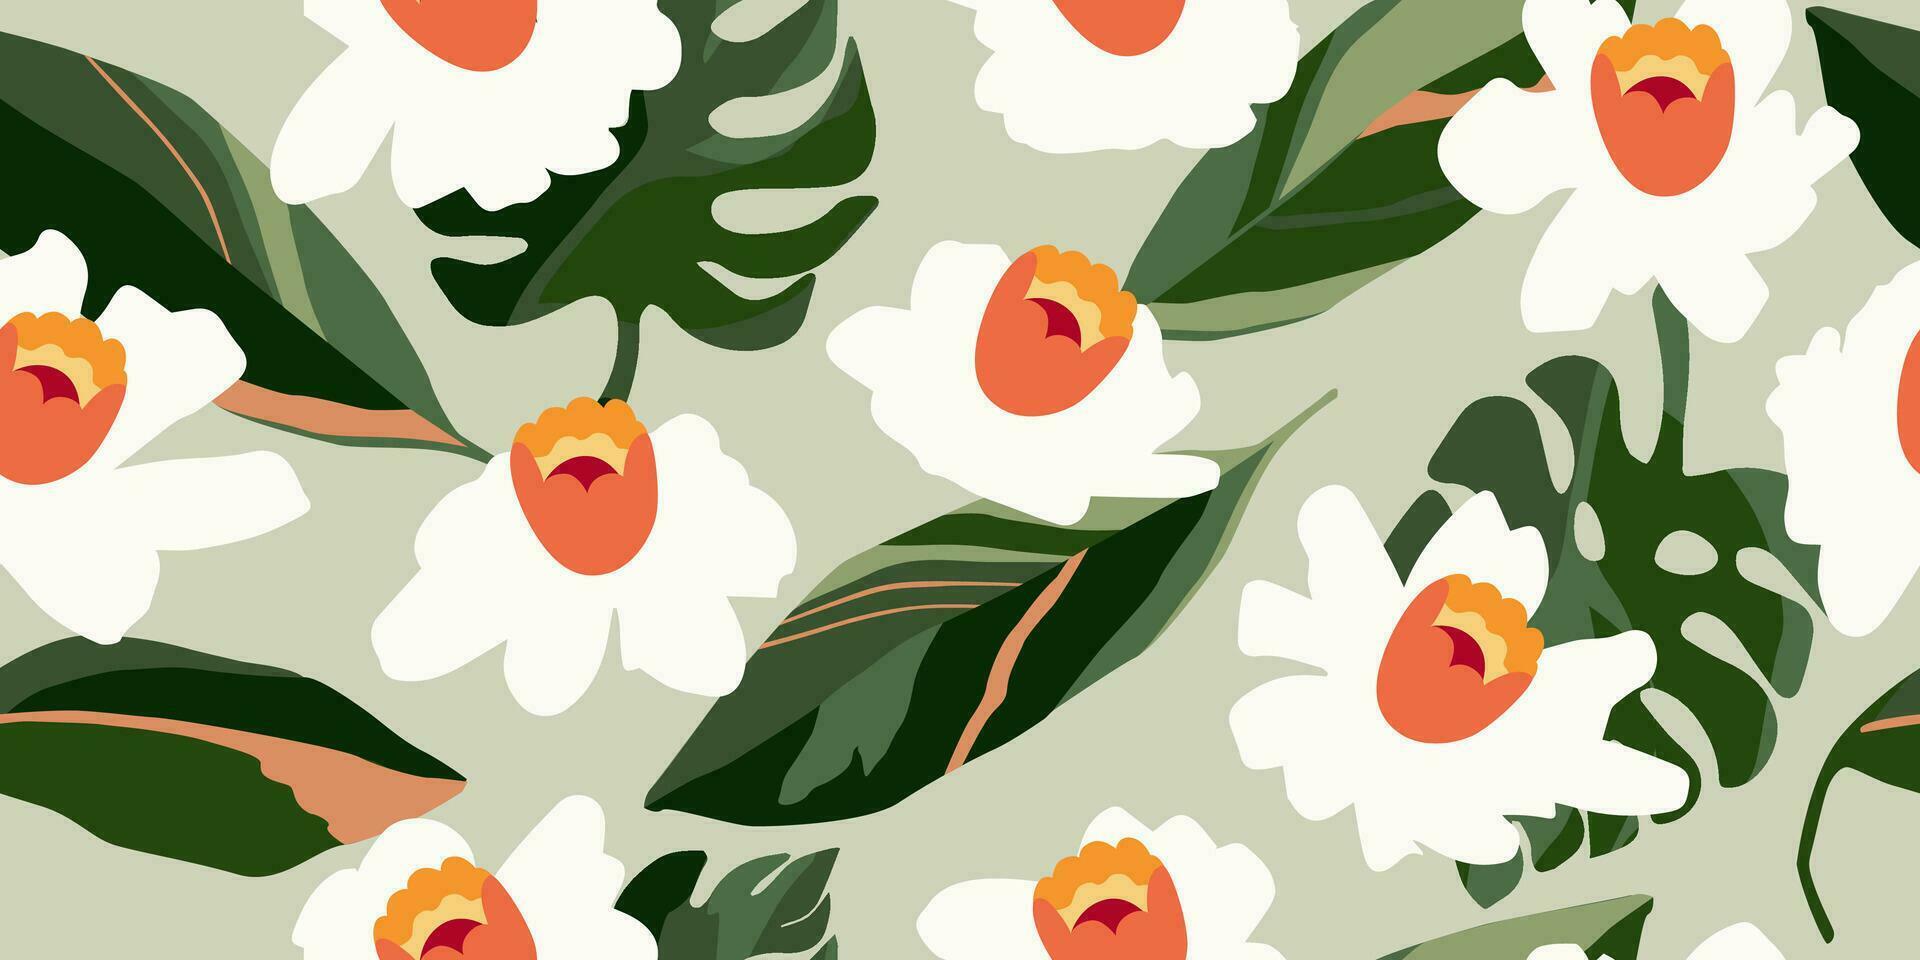 Hand drawn tropical flowers, seamless patterns with floral for fabric, textiles, clothing, wrapping paper, cover, banner, interior decor, abstract backgrounds. vector illustration.